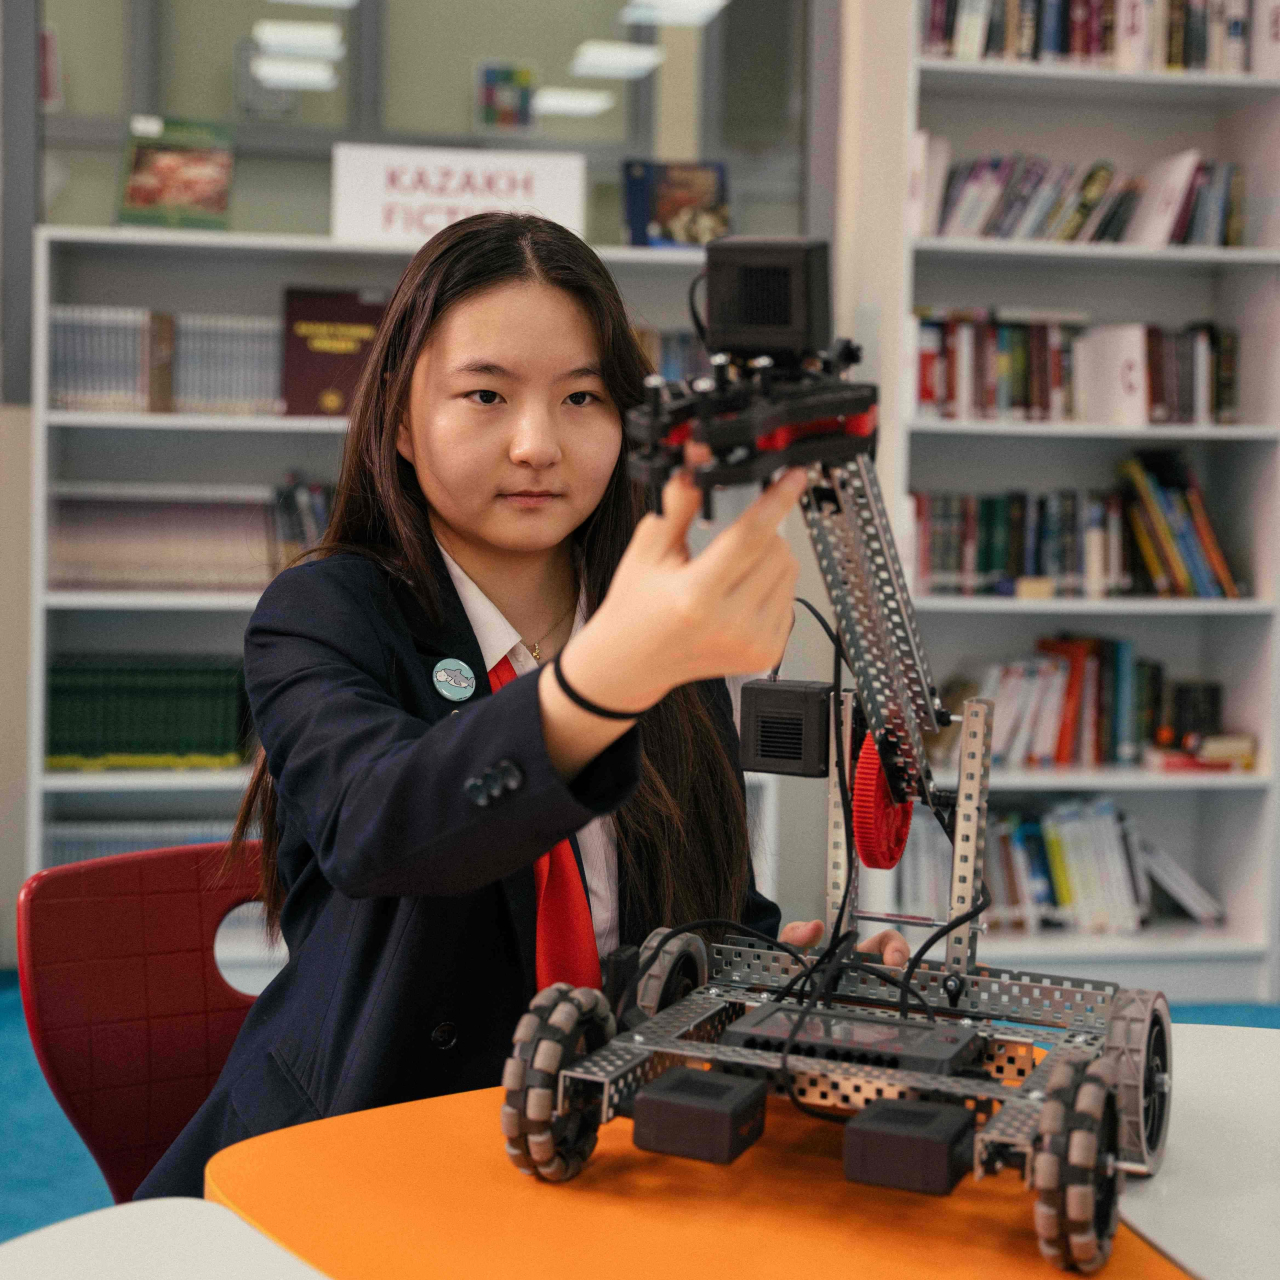 Exciting news from the Y12 robotics team!